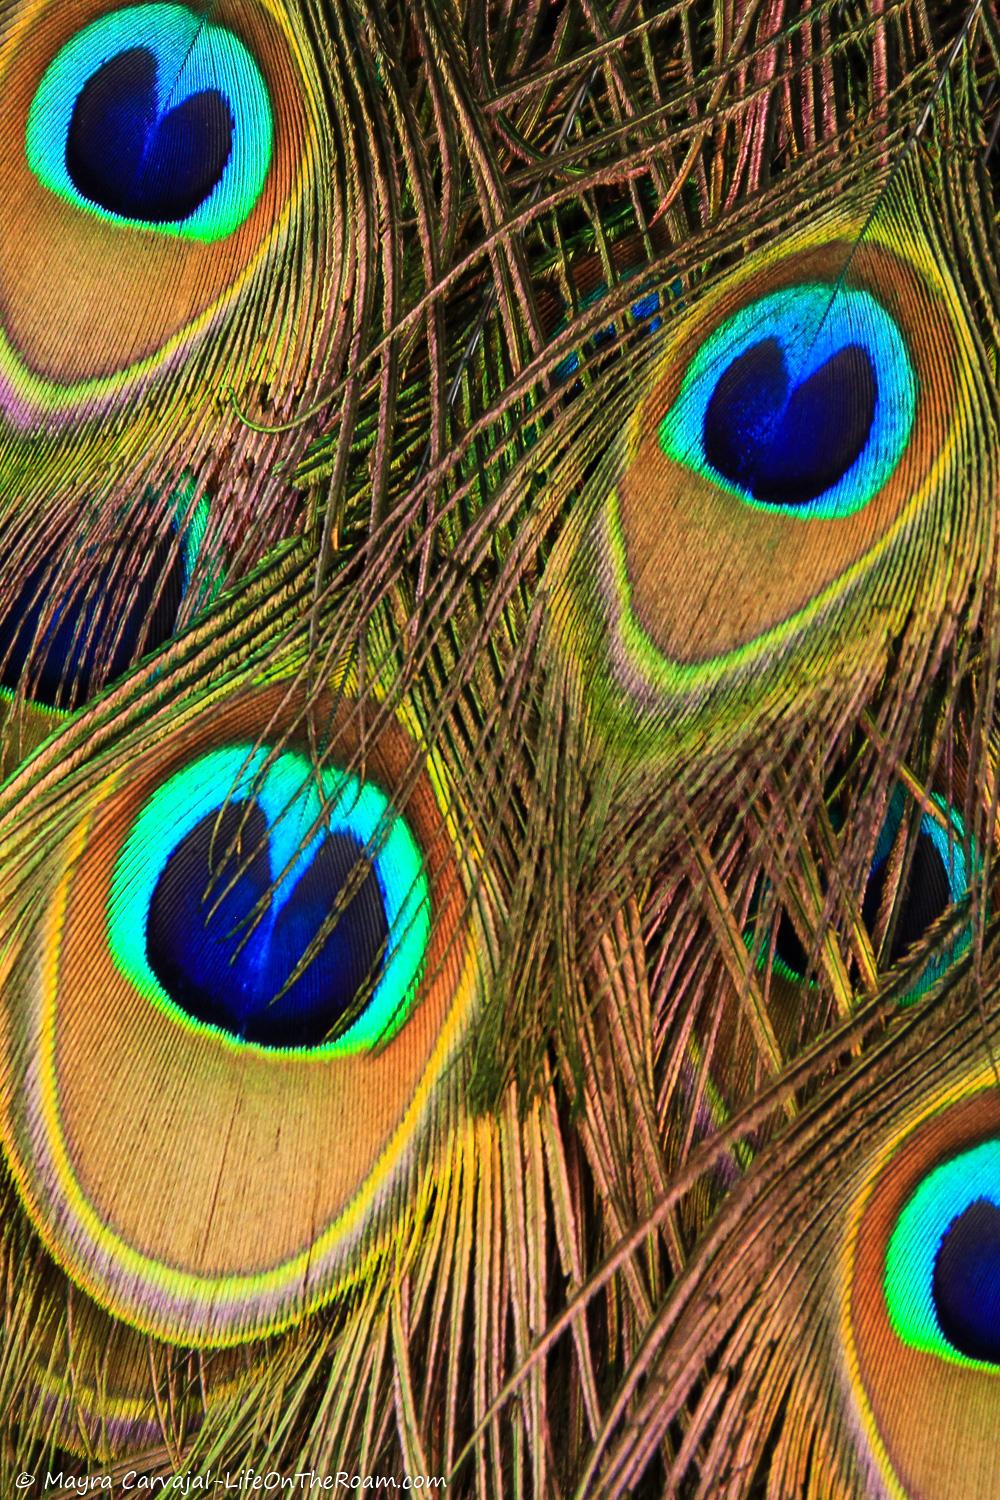 A peacock's tail